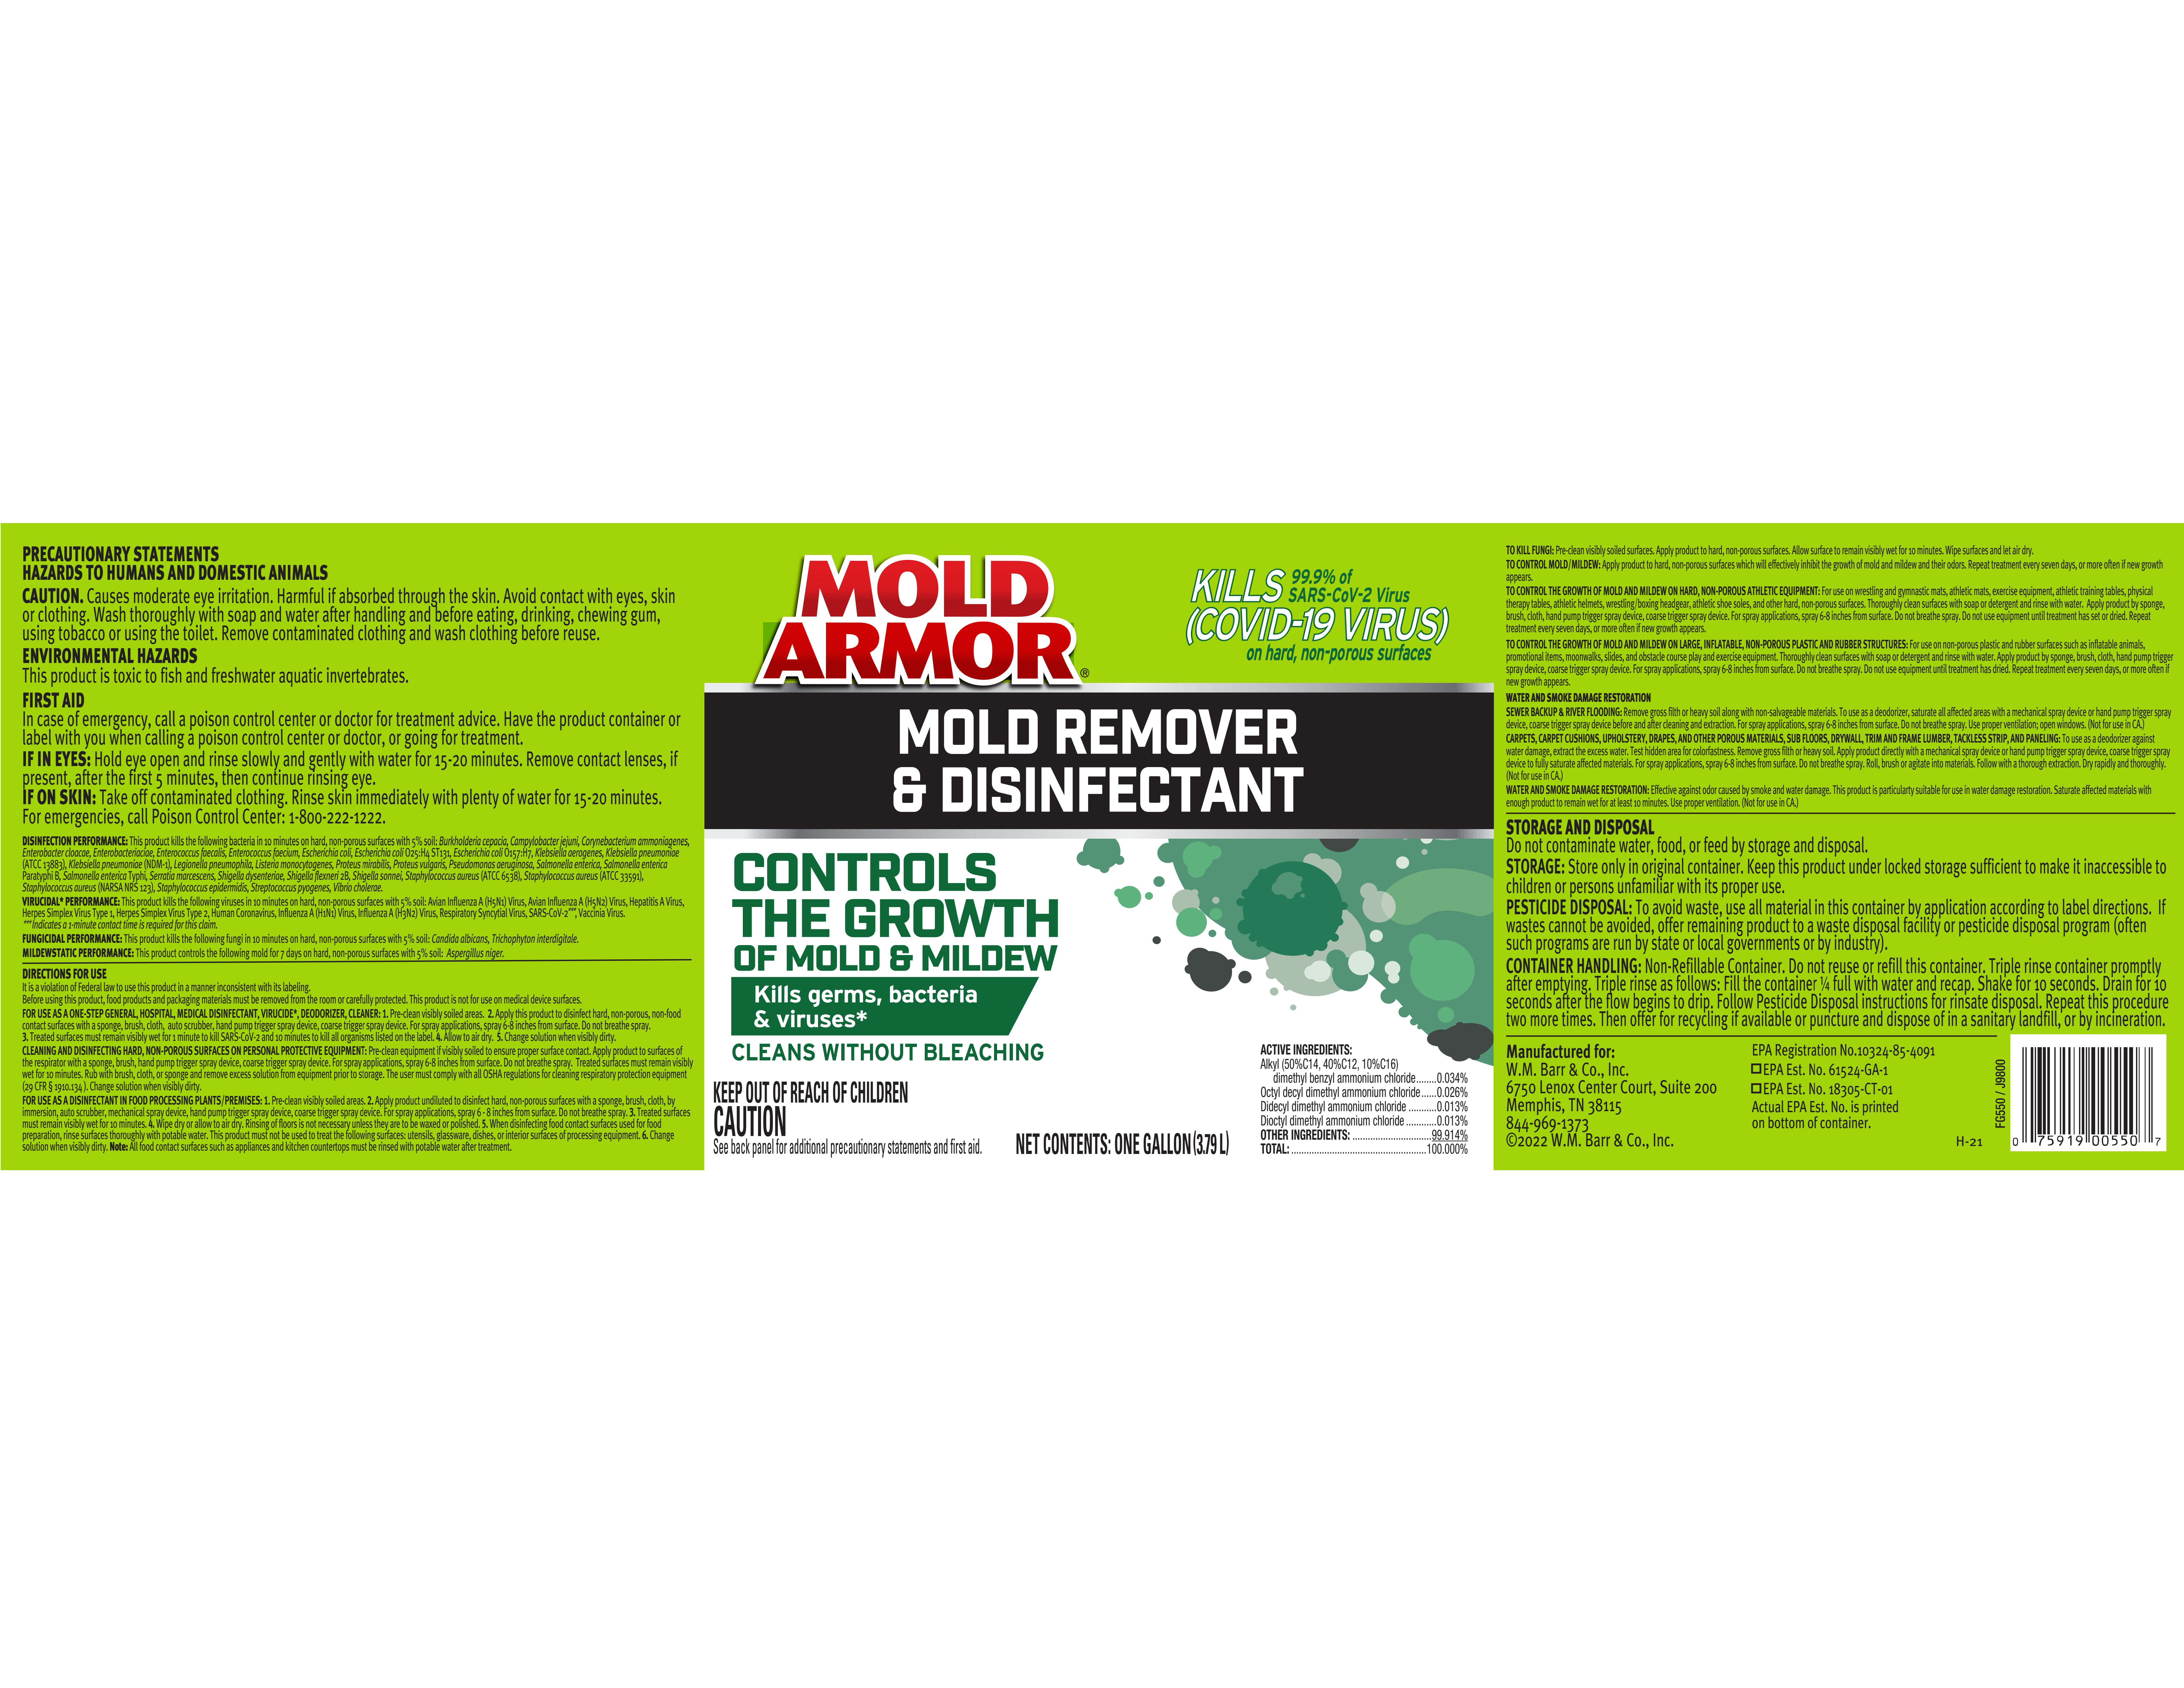 Mold Armor Pro Mold Remover & Disinfectant